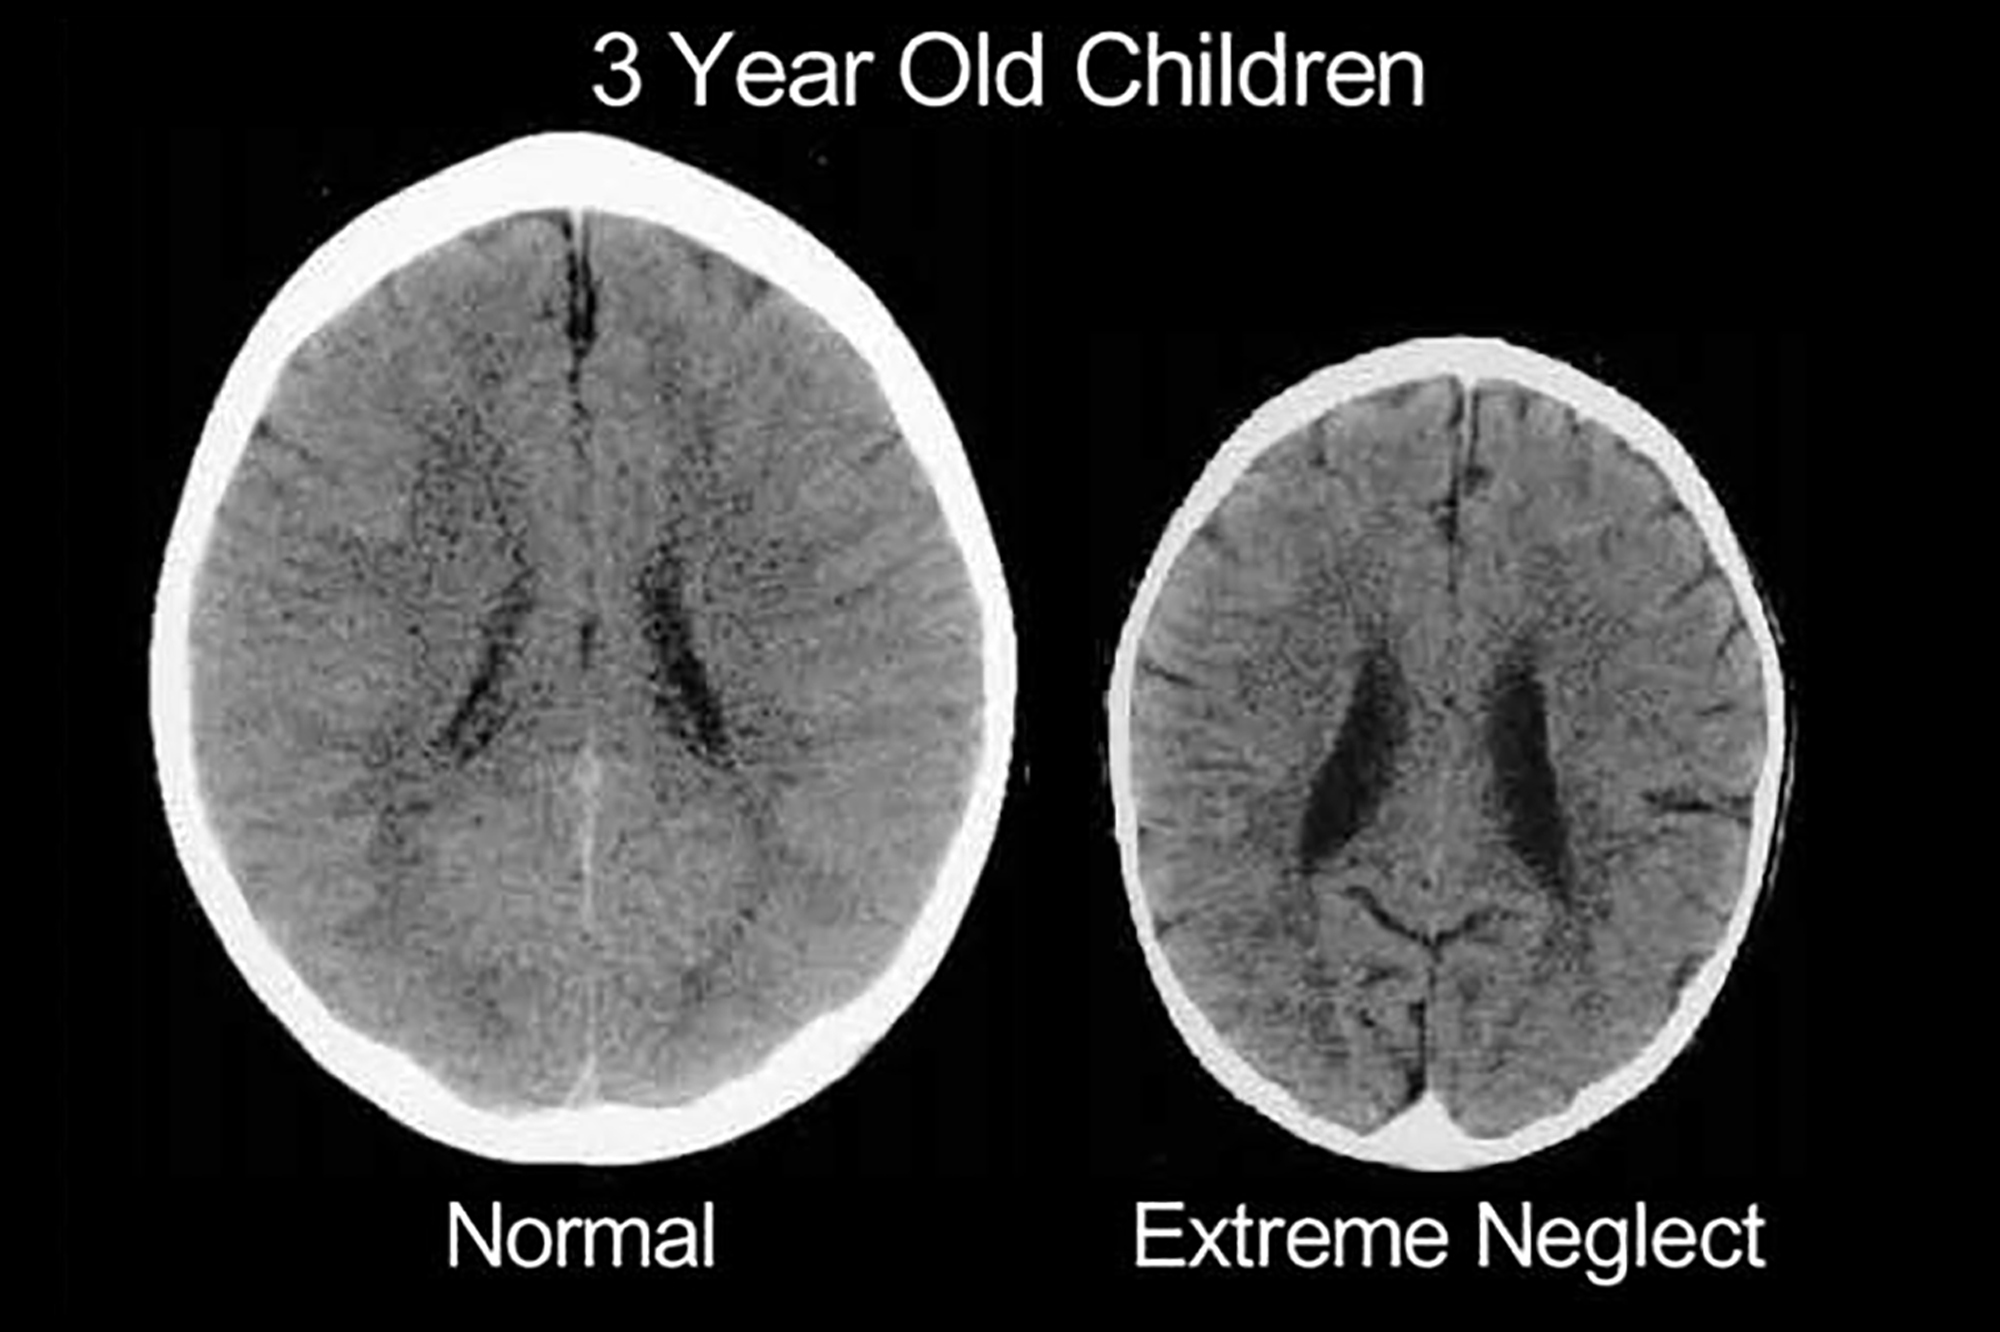 The CT scan on the left shows a normal child's brain, the one on the right is the brain of a child who has been the victim of emotional trauma.